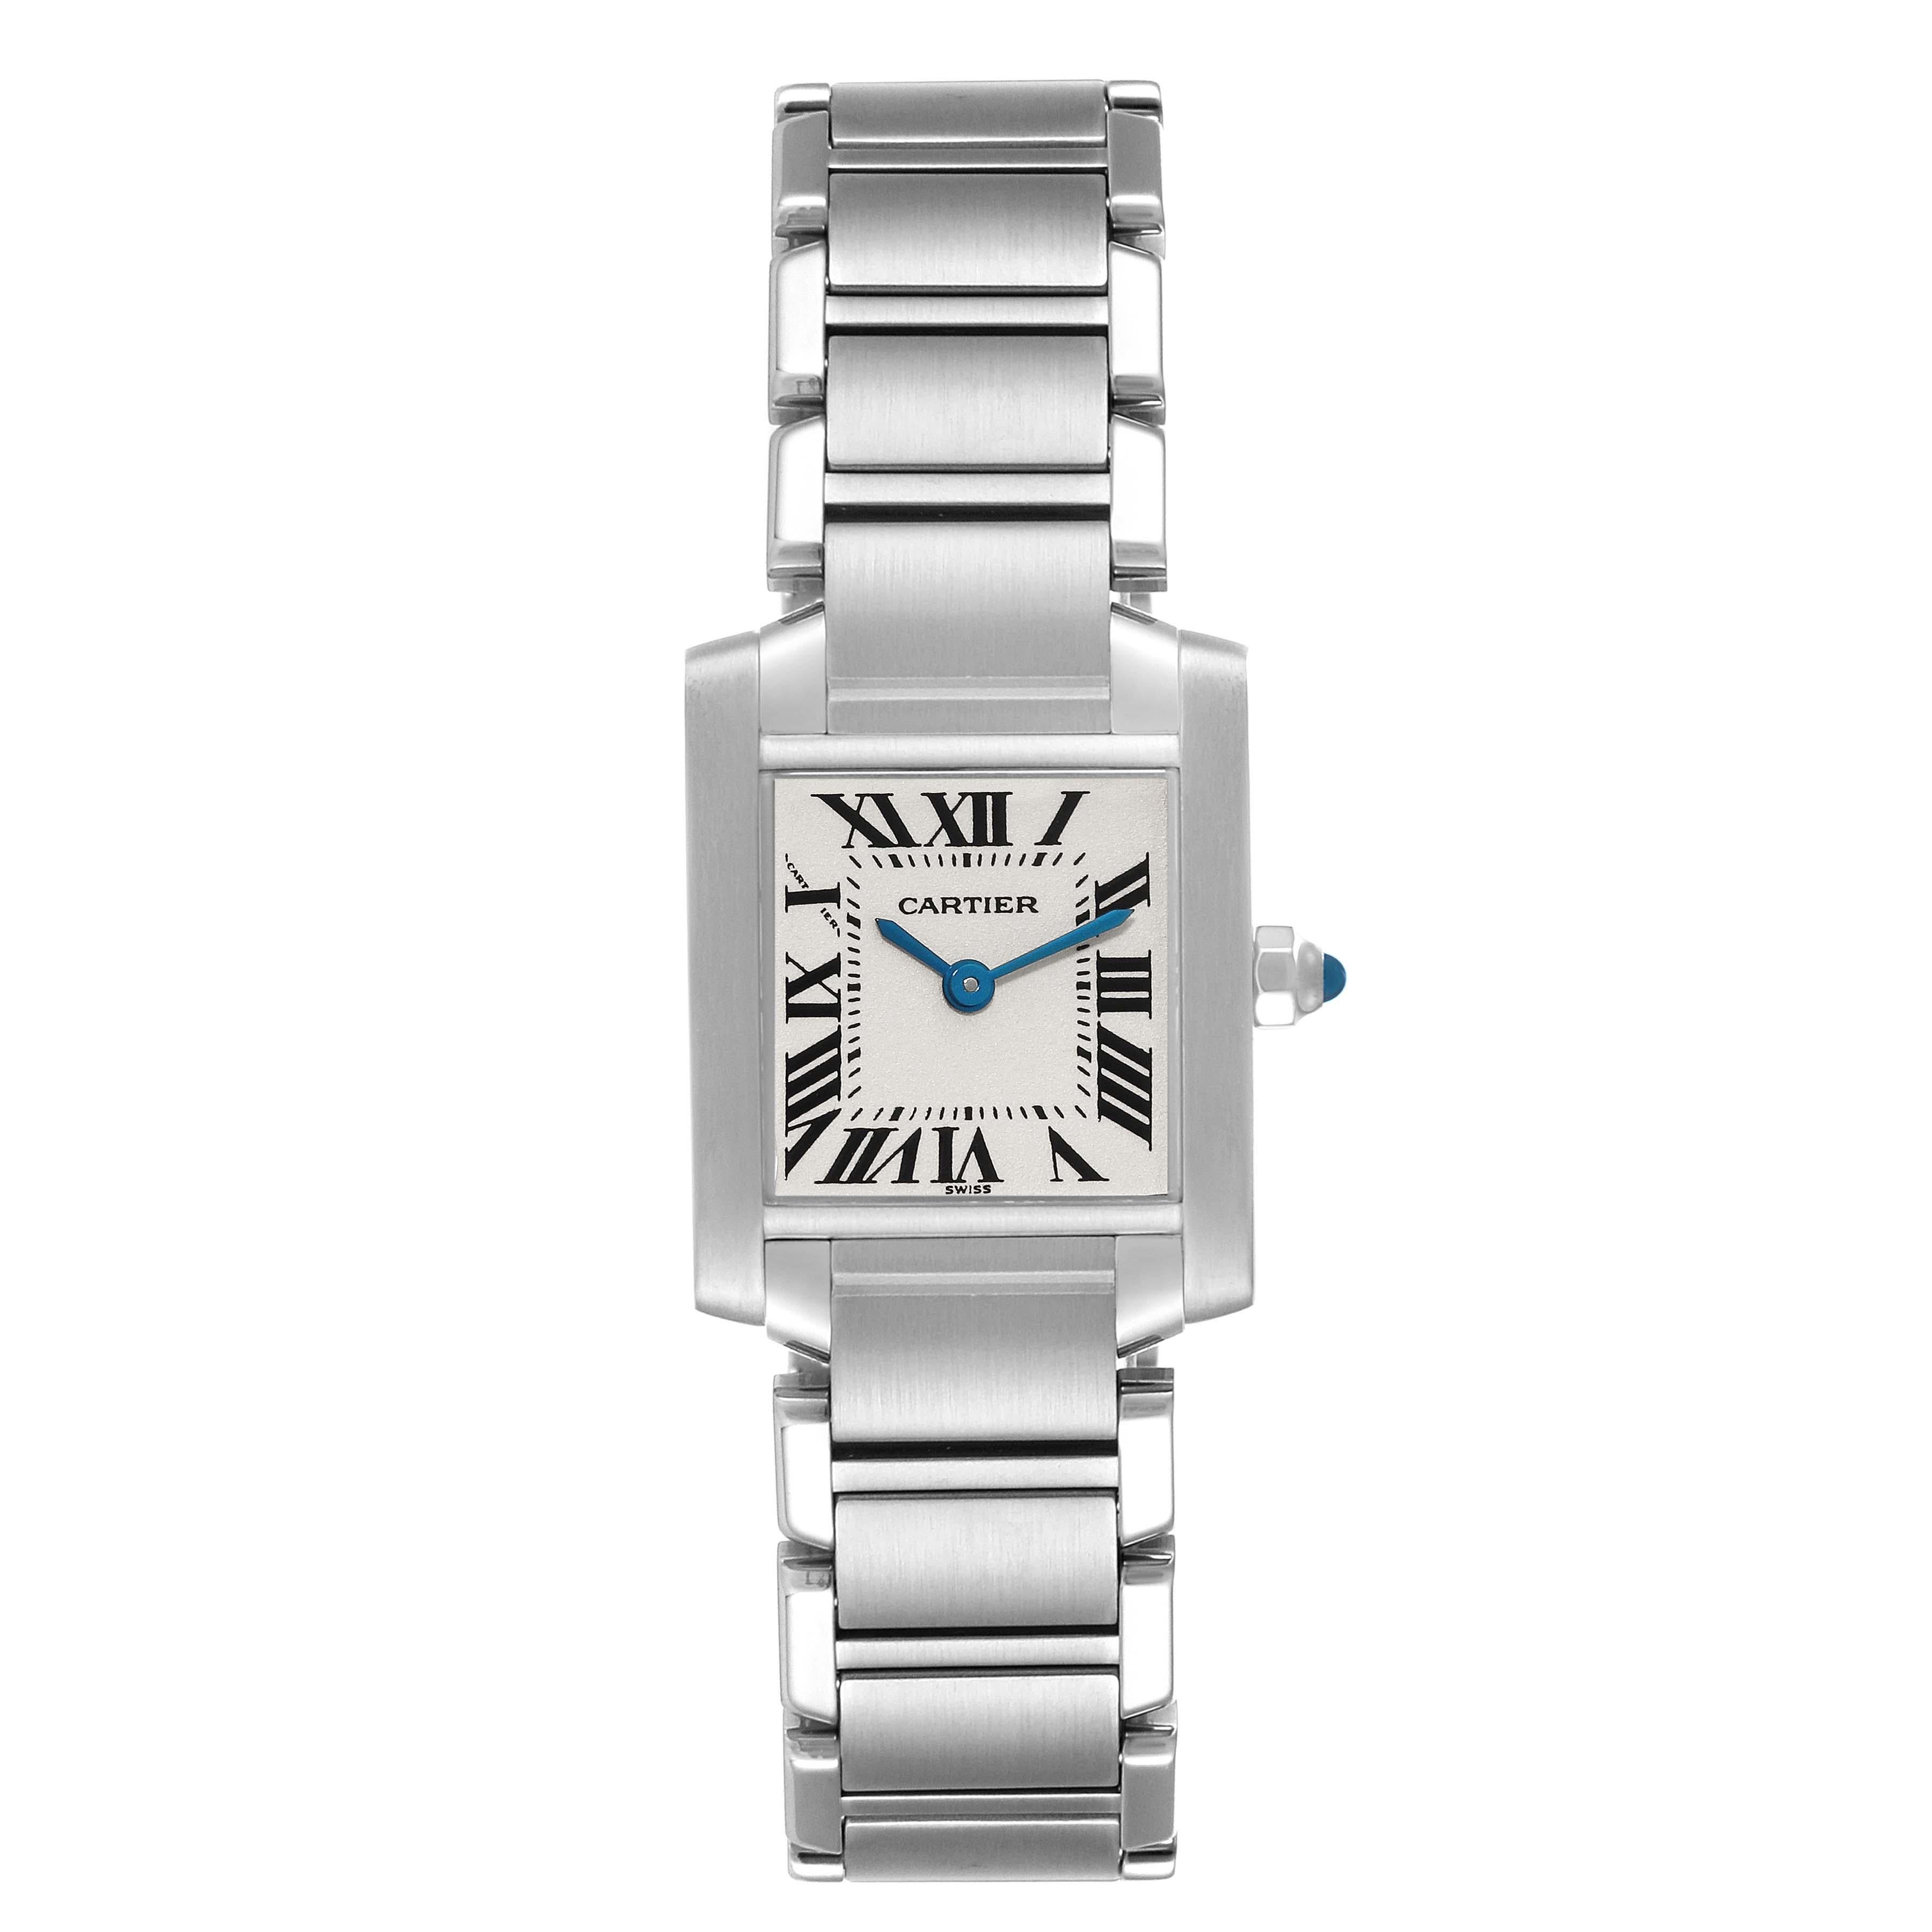 Cartier Tank Francaise Small Silver Dial Steel Ladies Watch W51008Q3 Box Papers en vente 3